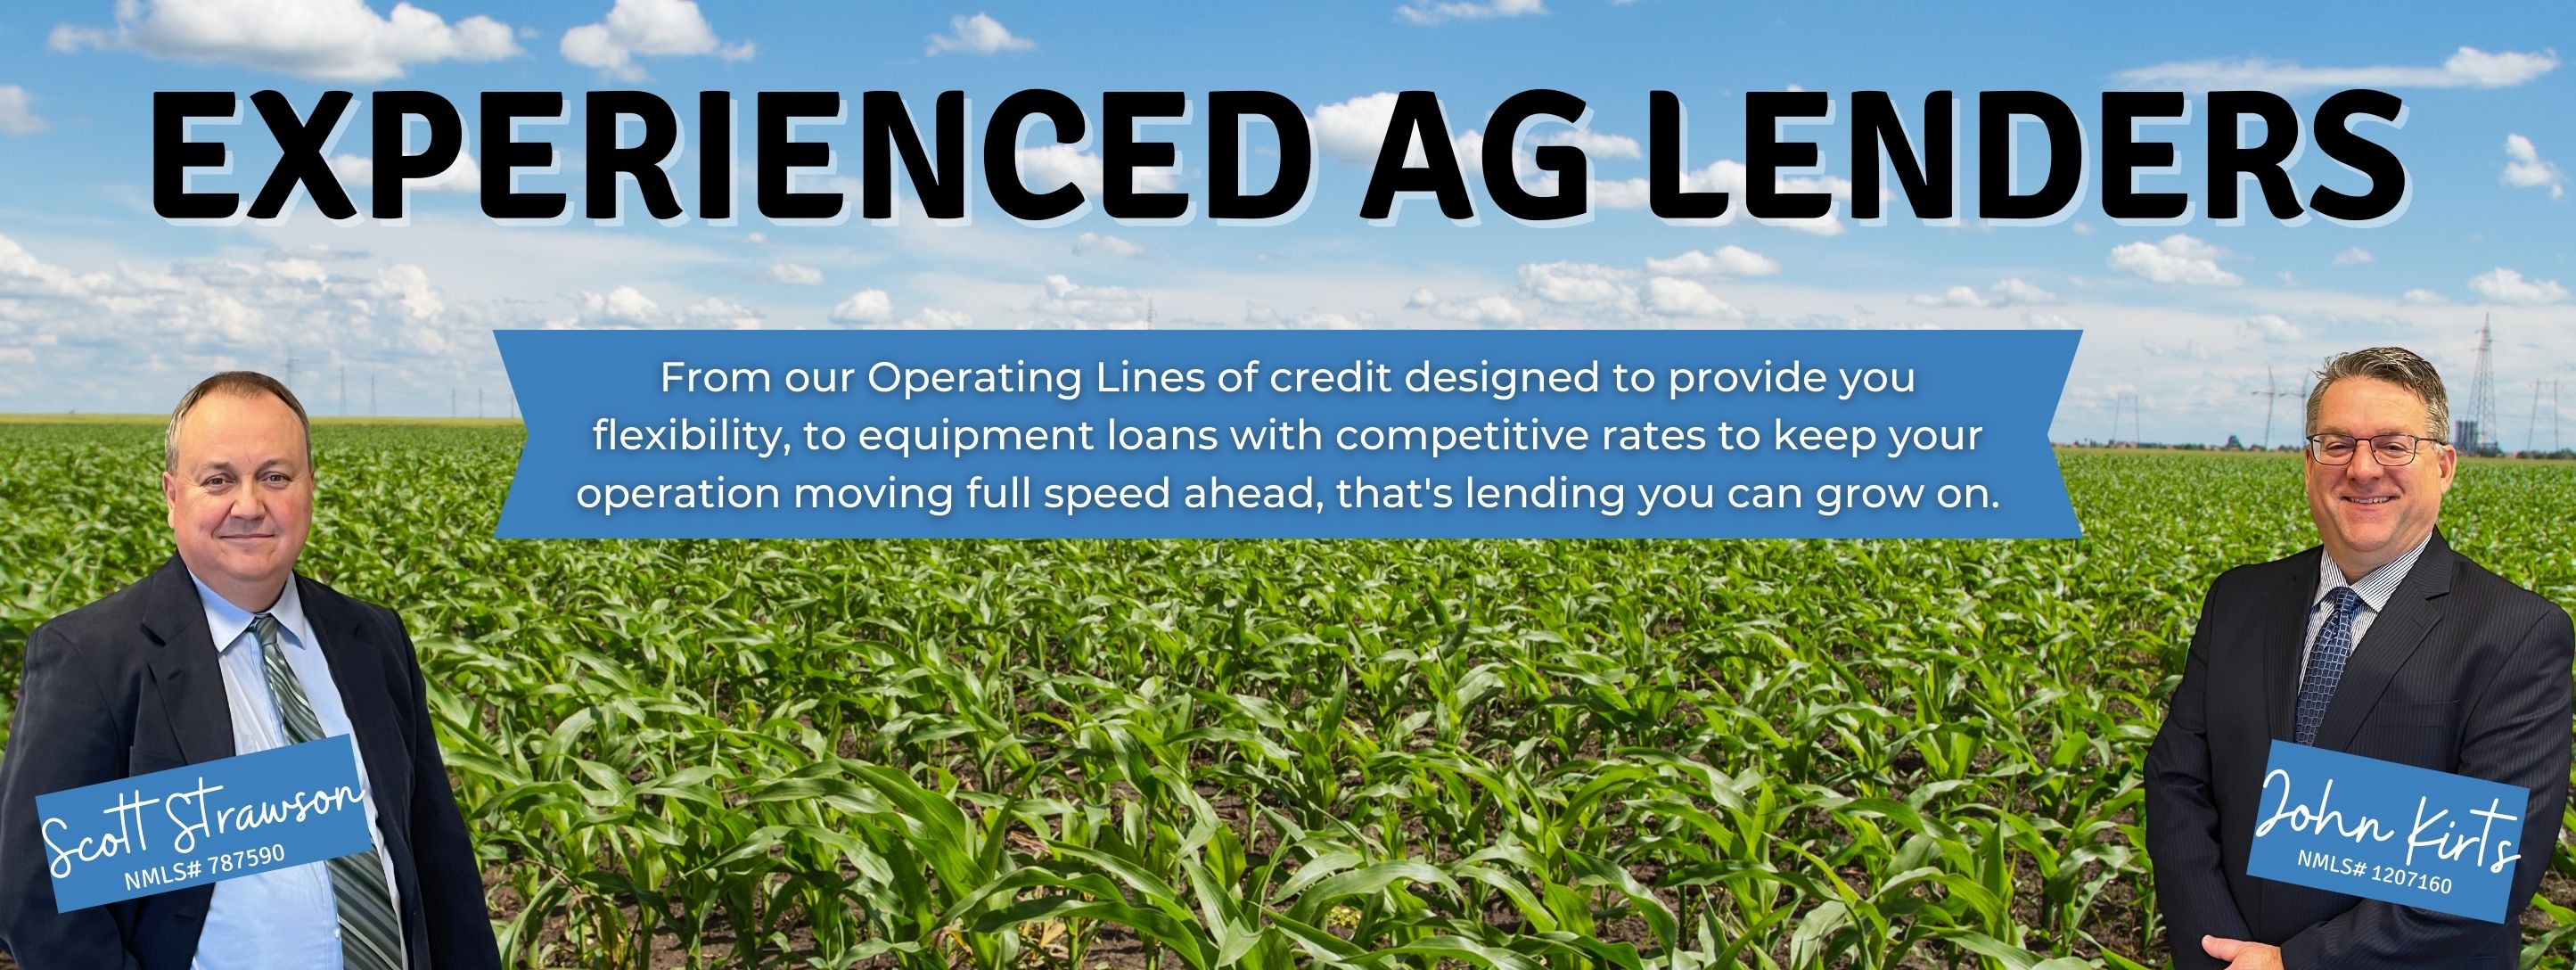 First Trust Bank Experienced Ag Lenders from our operating lines of credit designed to provide you flexibility, to quipment loans with competititve rates to keep your operation moving full speed ahead. That's lending you can grow on.